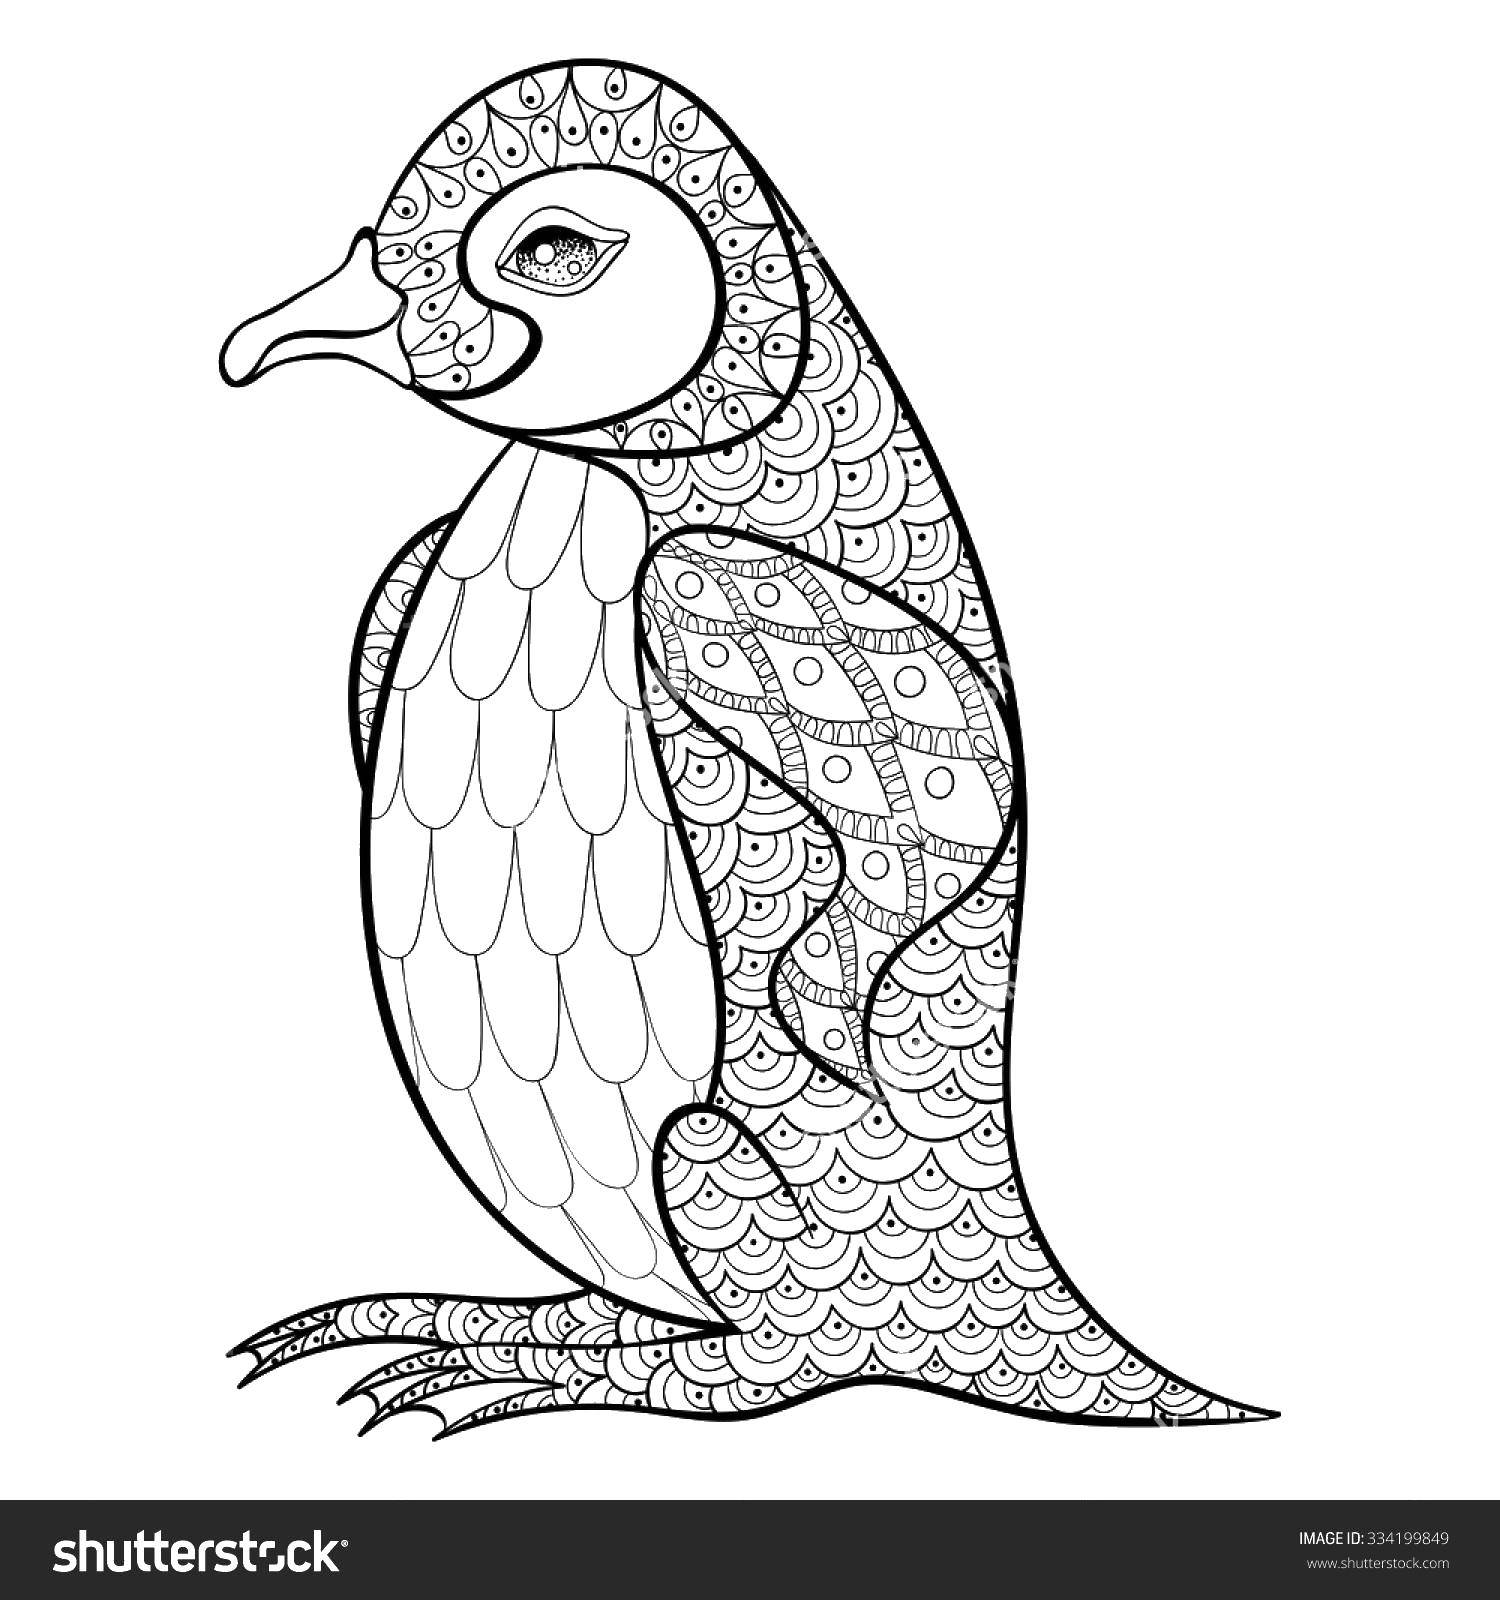 Coloring Patterned penguin. Category patterns. Tags:  Patterns, animals.